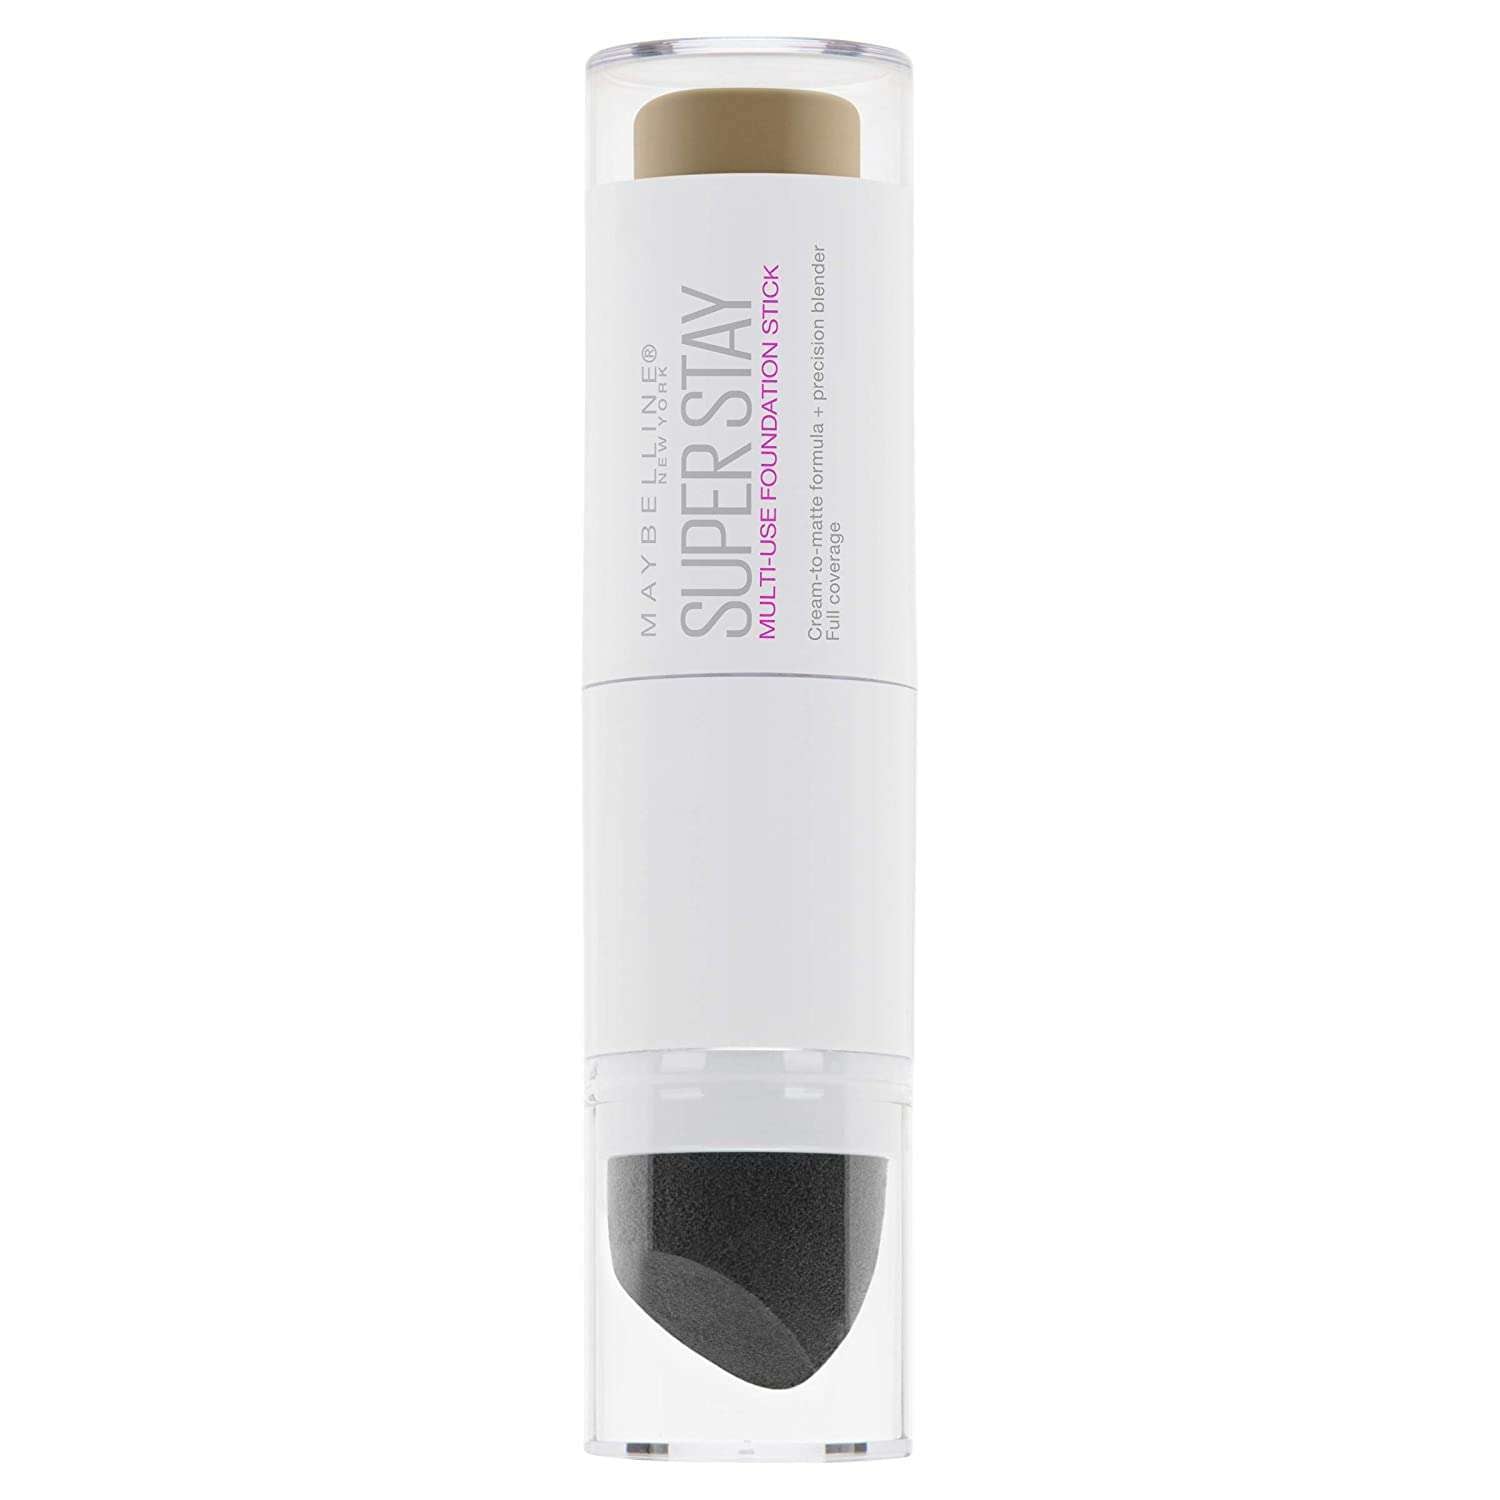 Maybelline Super Stay Multi-Use Foundation Stick - 330 Toffeeorabelca